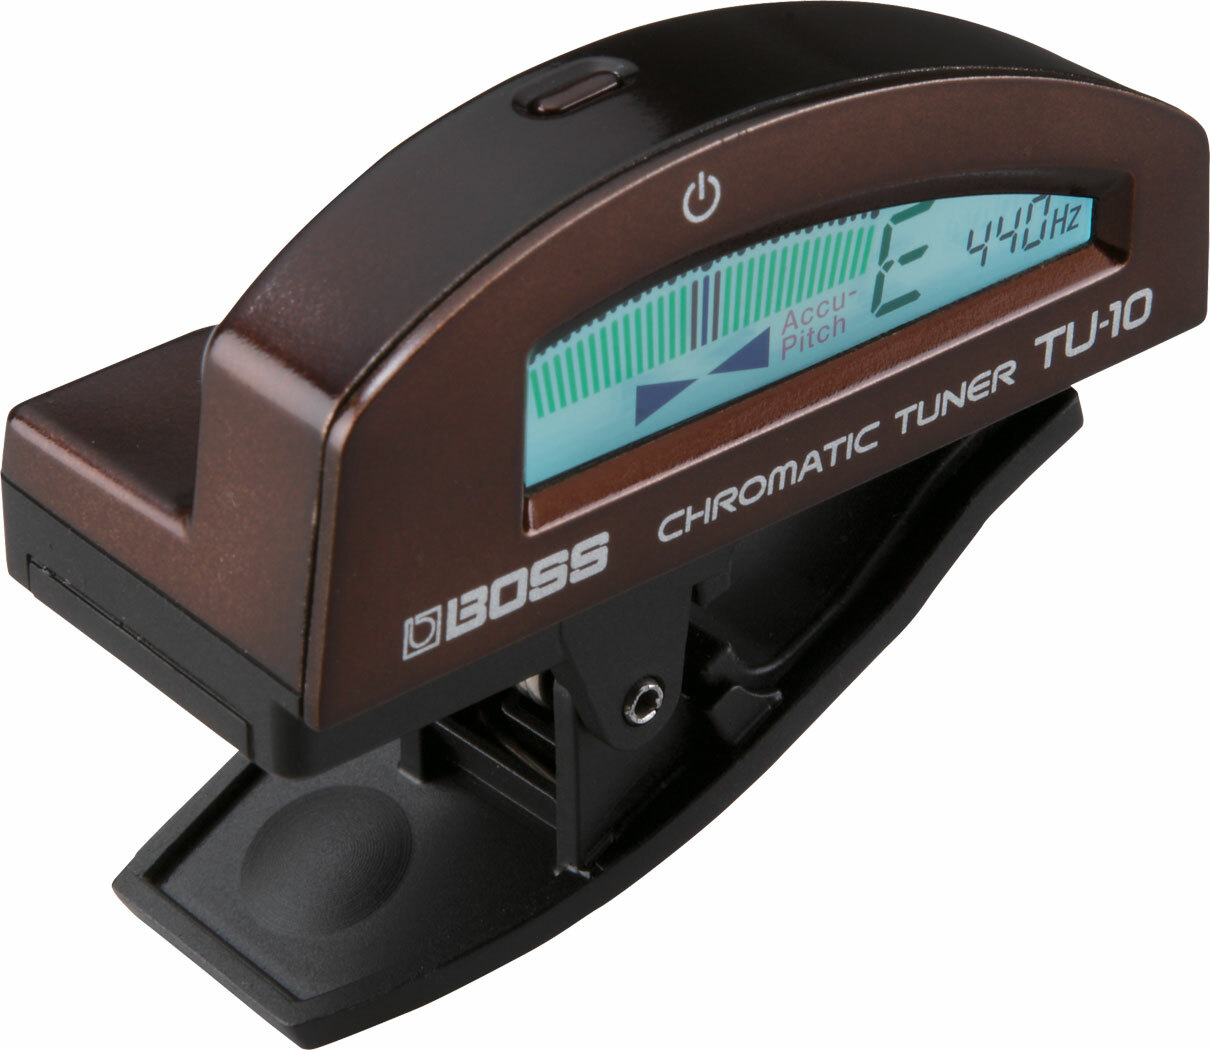 Boss Tu-10 Clip-on Chromatic Tuner - Brown - Guitar tuner - Main picture